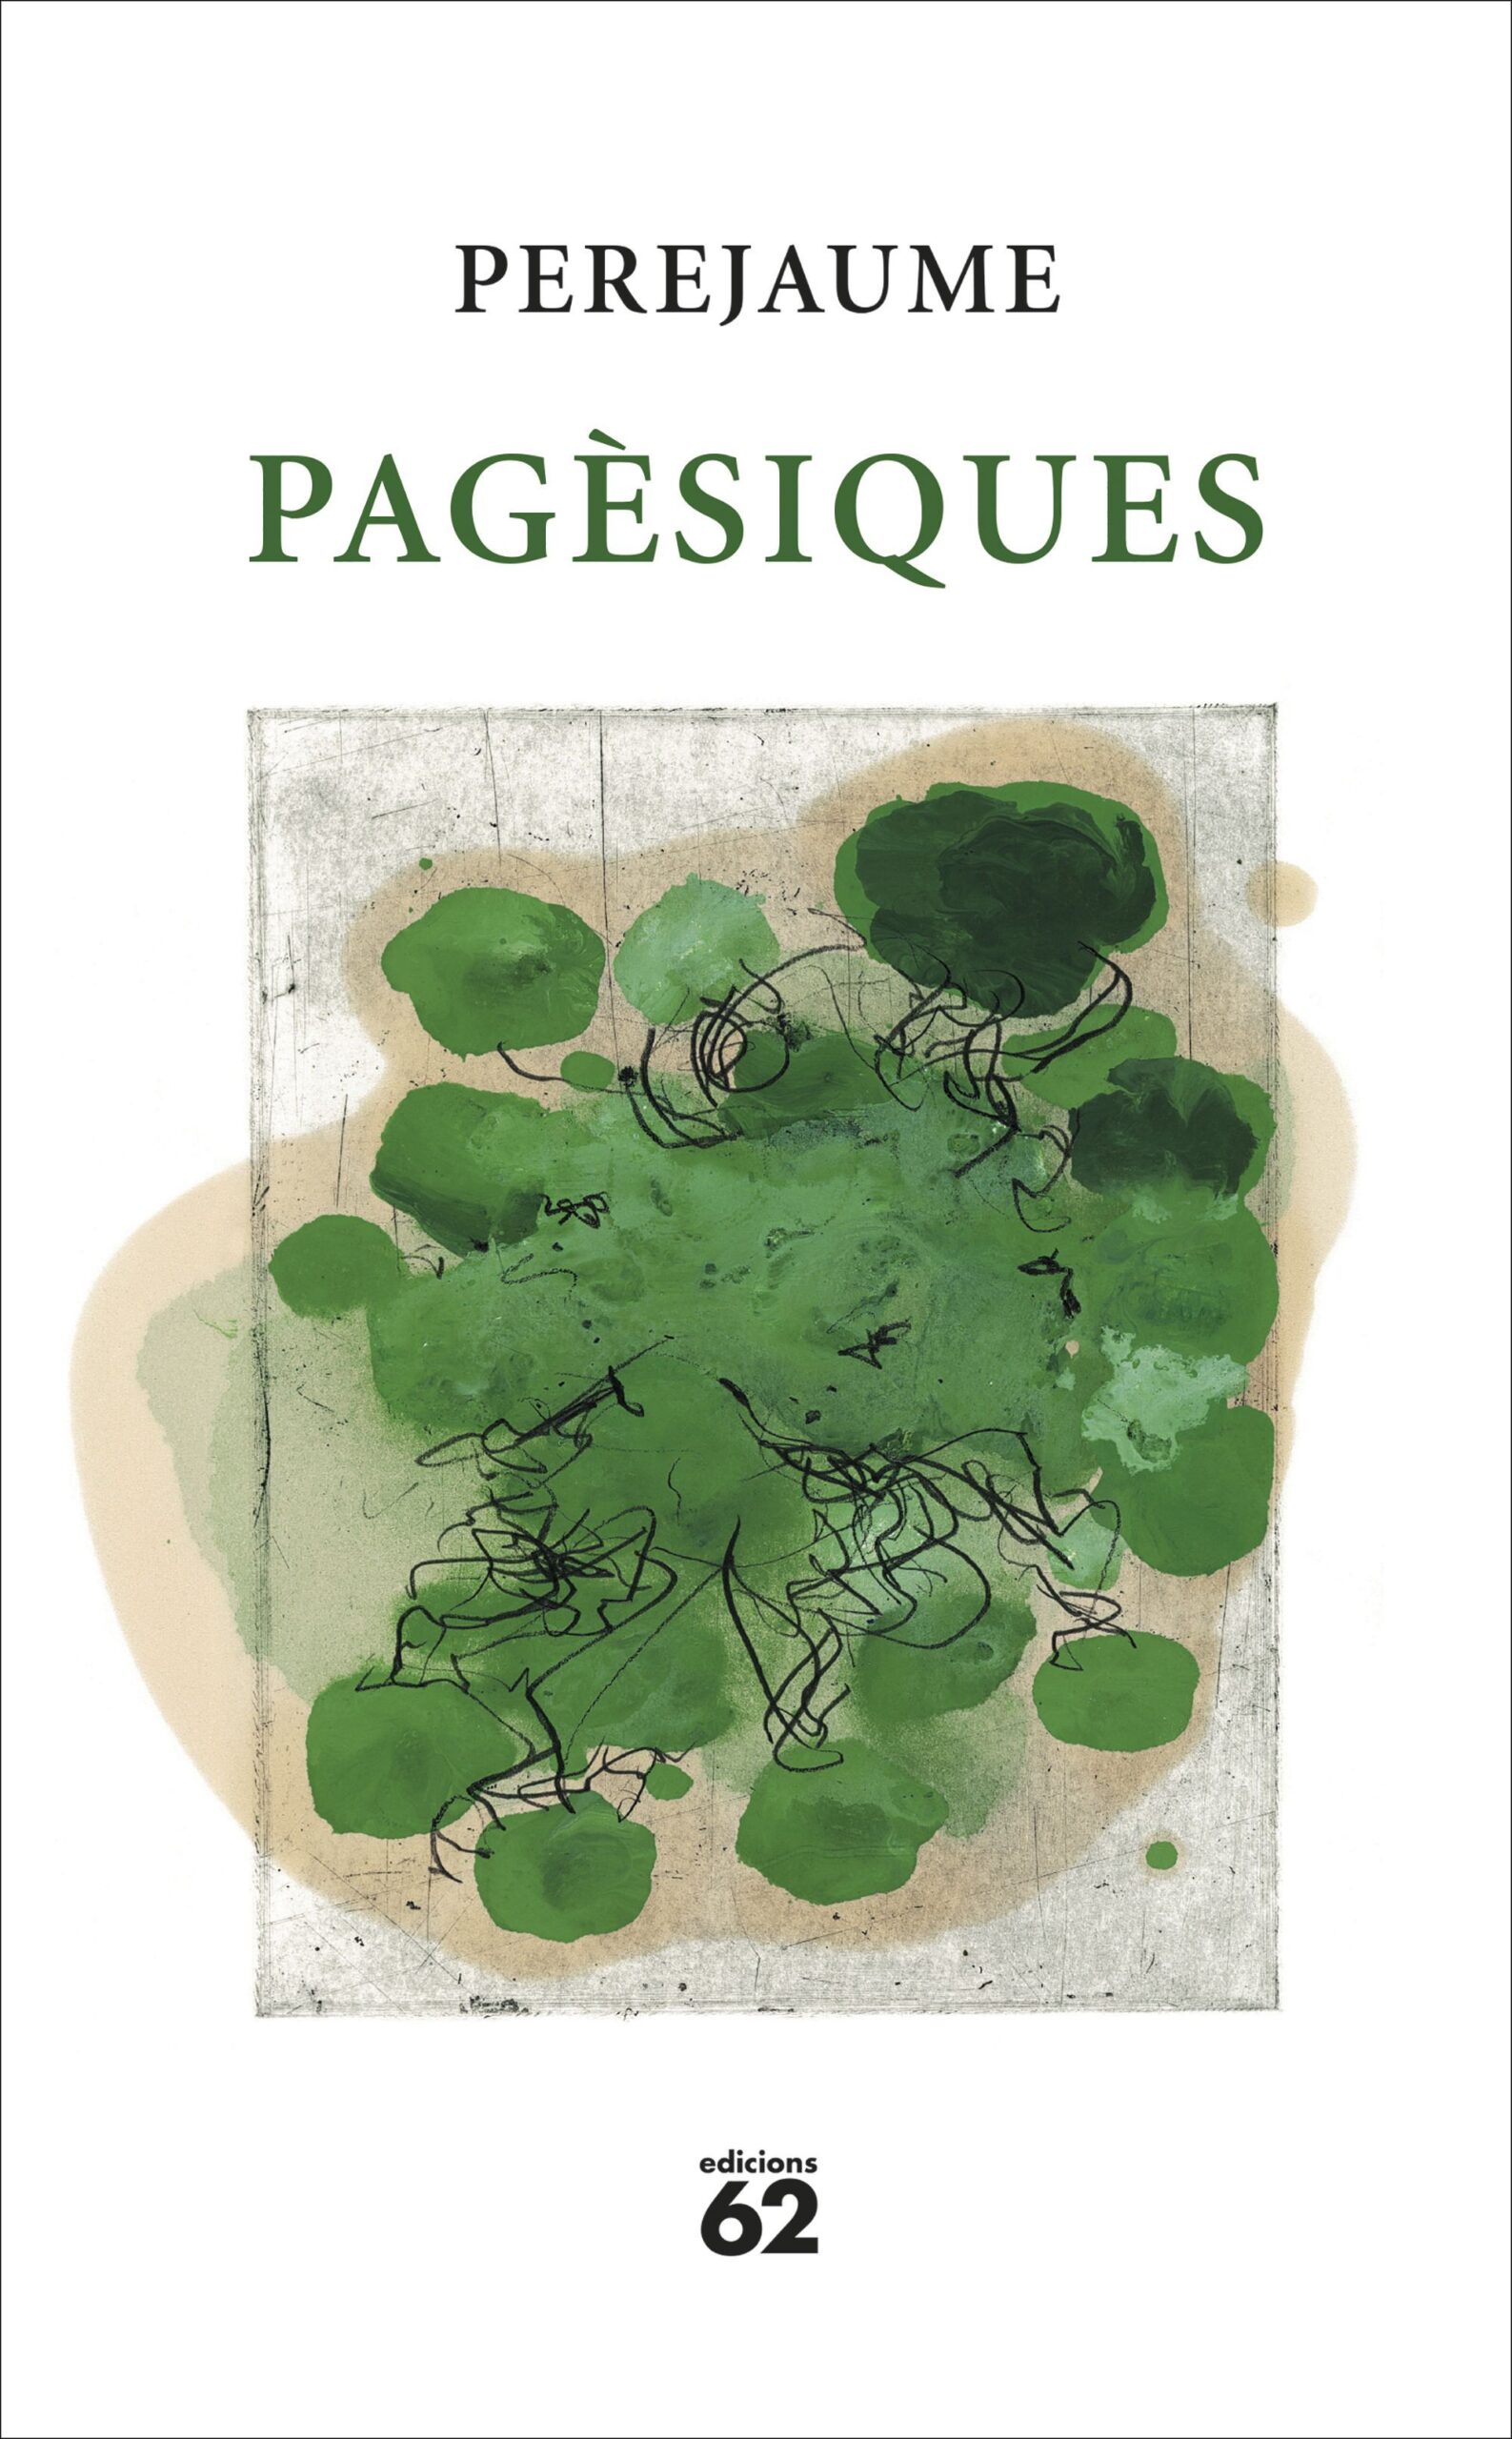 PAGESIQUES.jpg